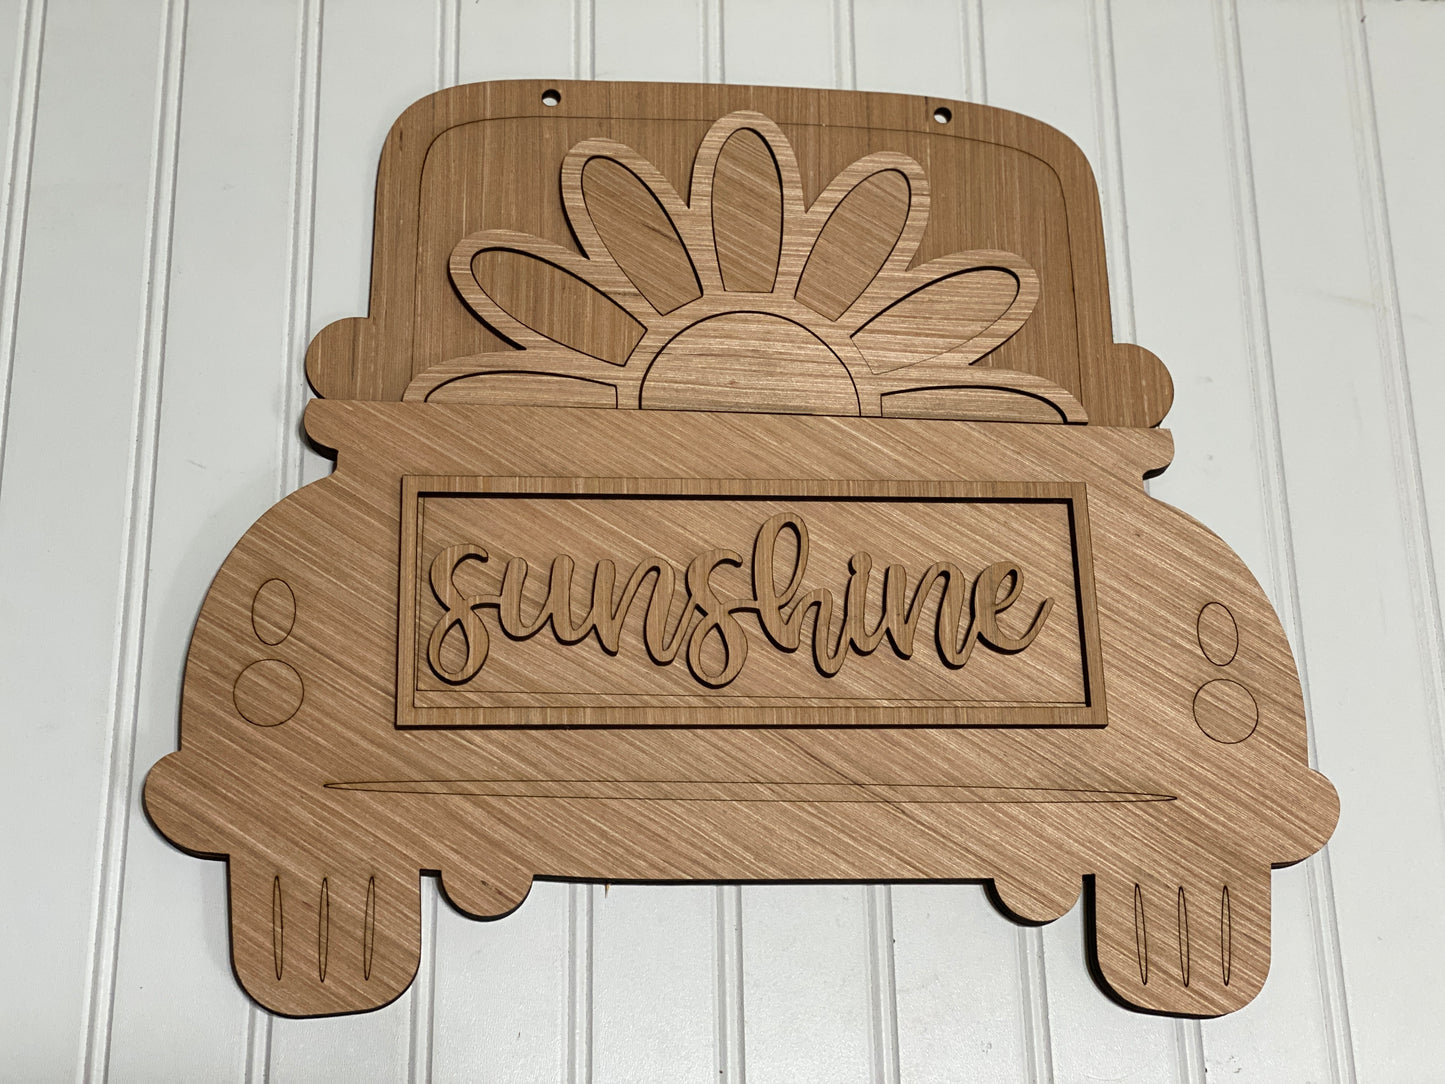 Sunshine with Daisy Truck  Laser Cut Out Blank